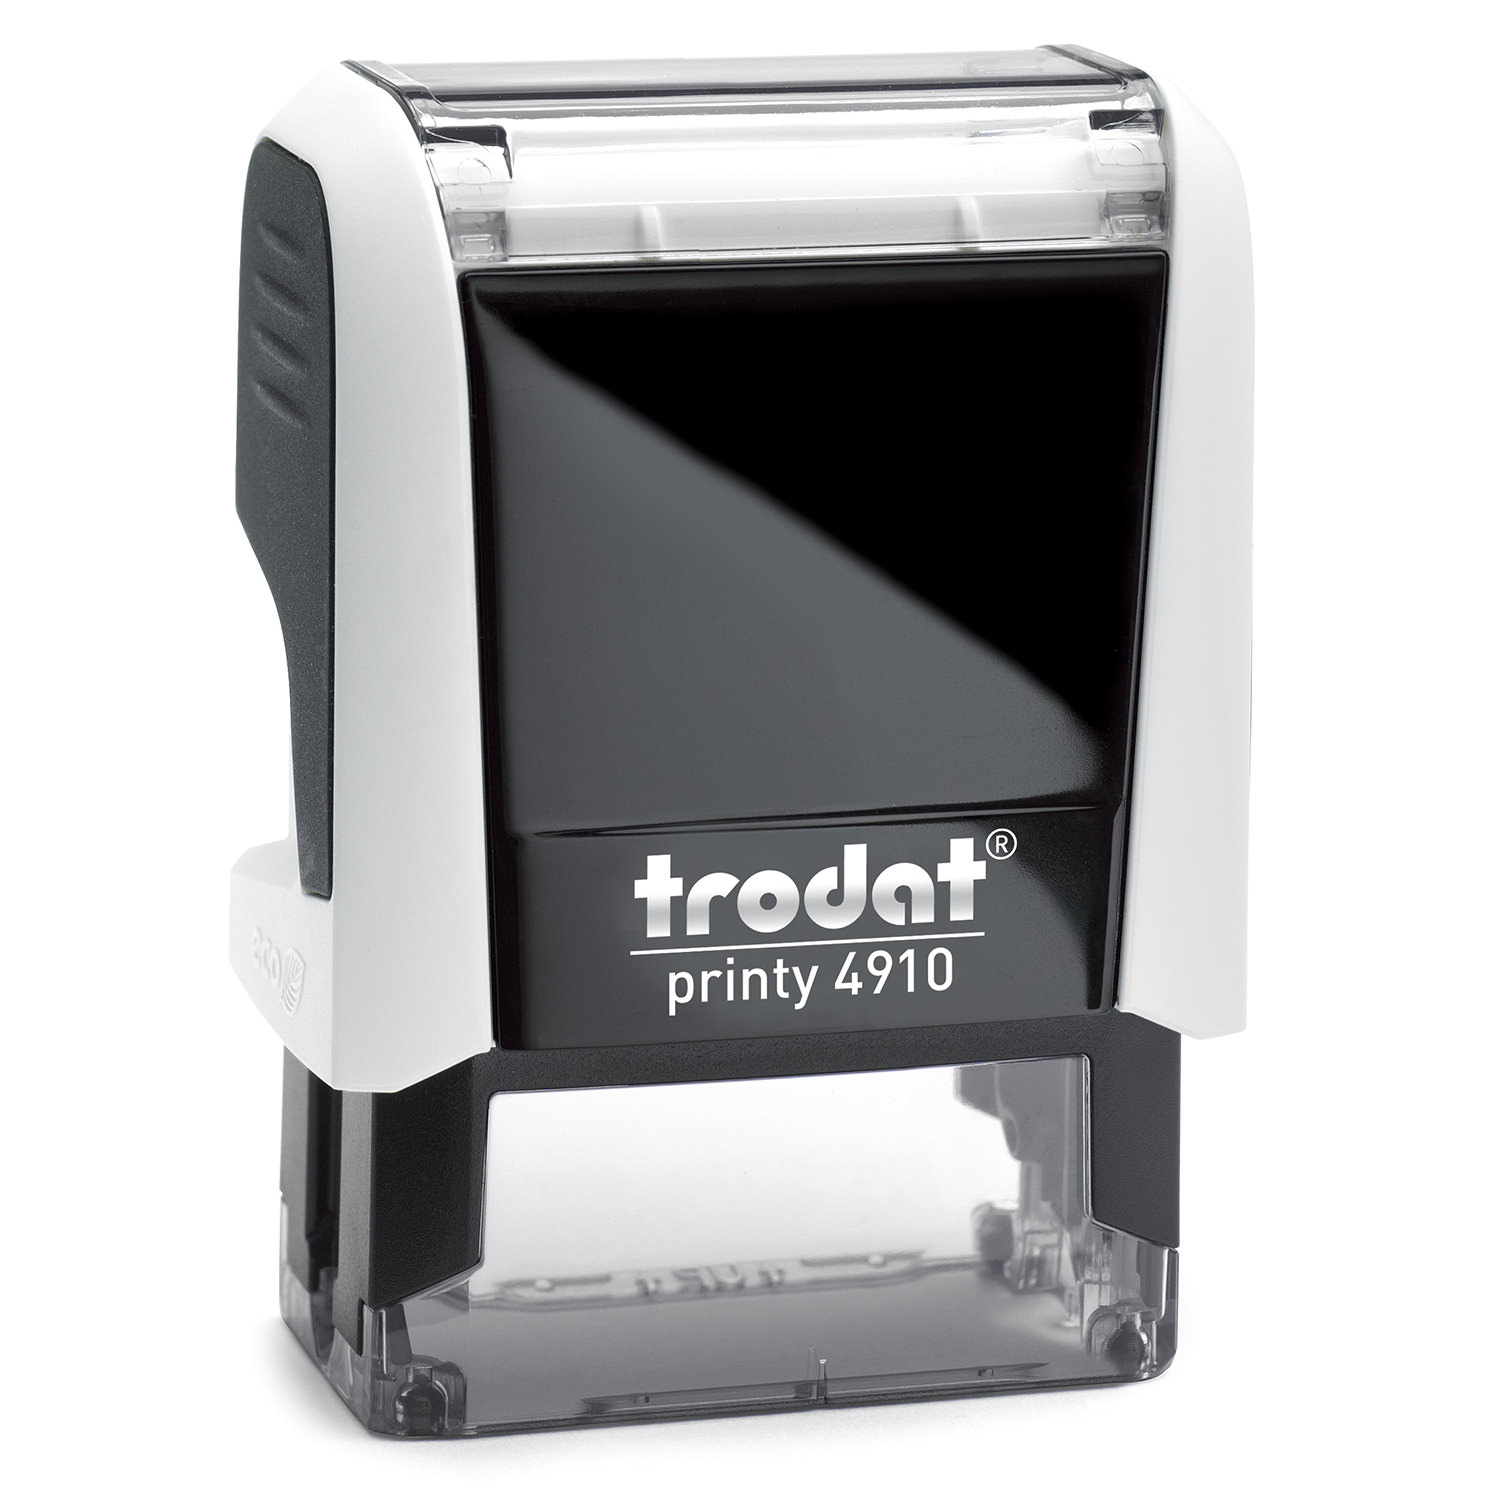 Customize and order your Trodat Printy 4910